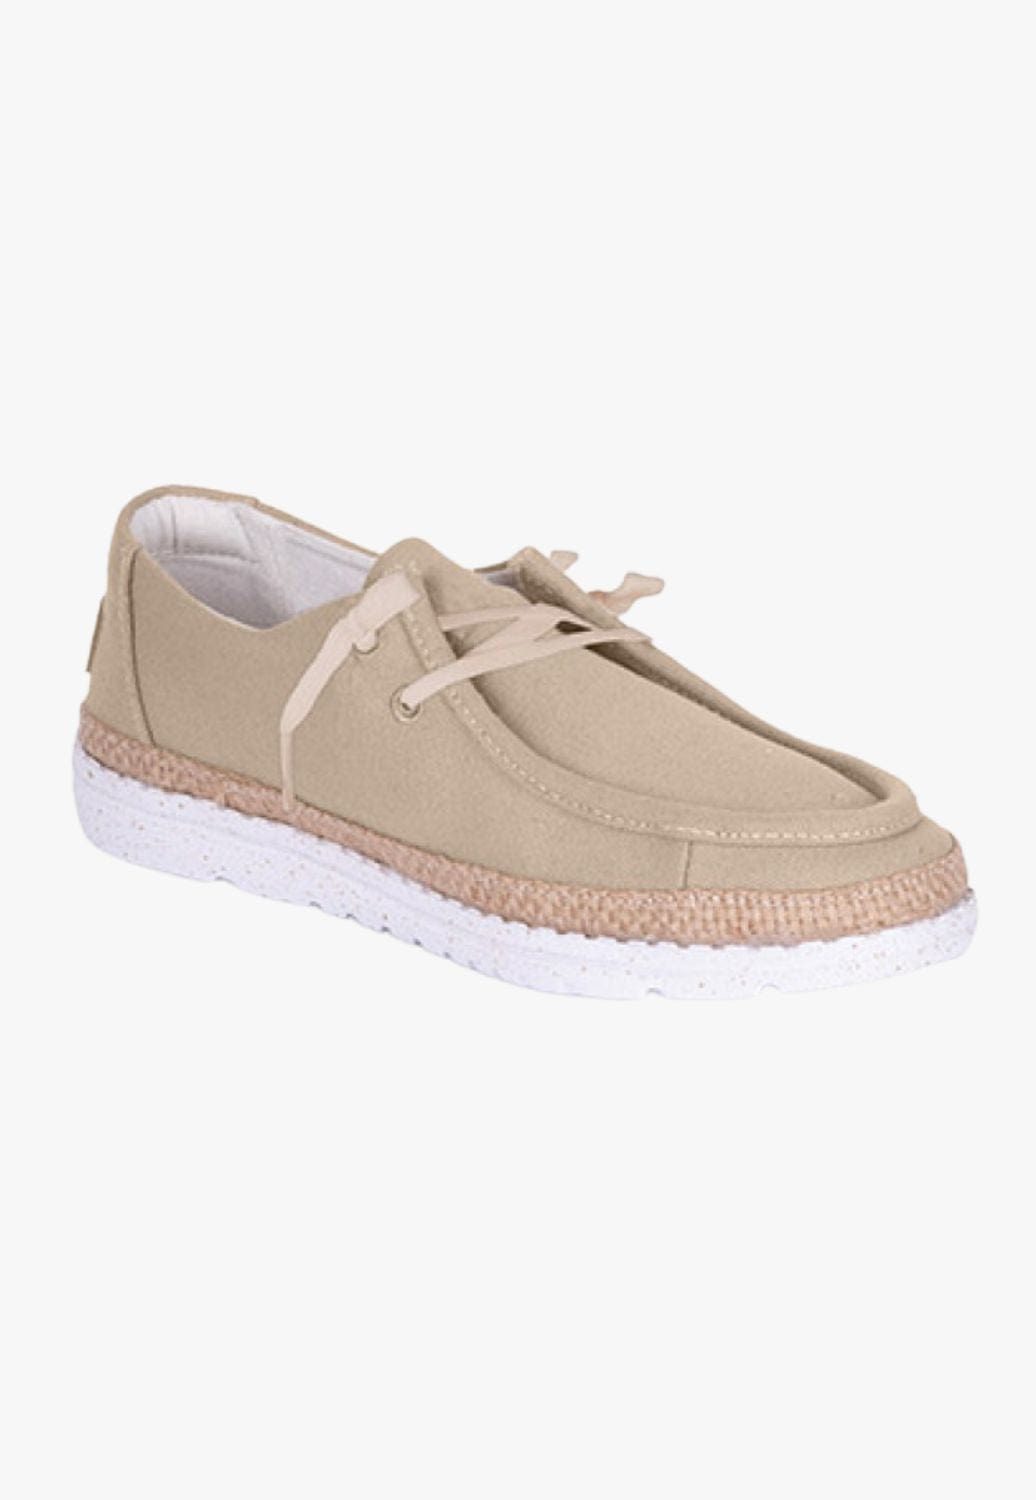 Thomas Cook FOOTWEAR - Womens Casual Thomas Cook Womens Vacation Lite Shoe